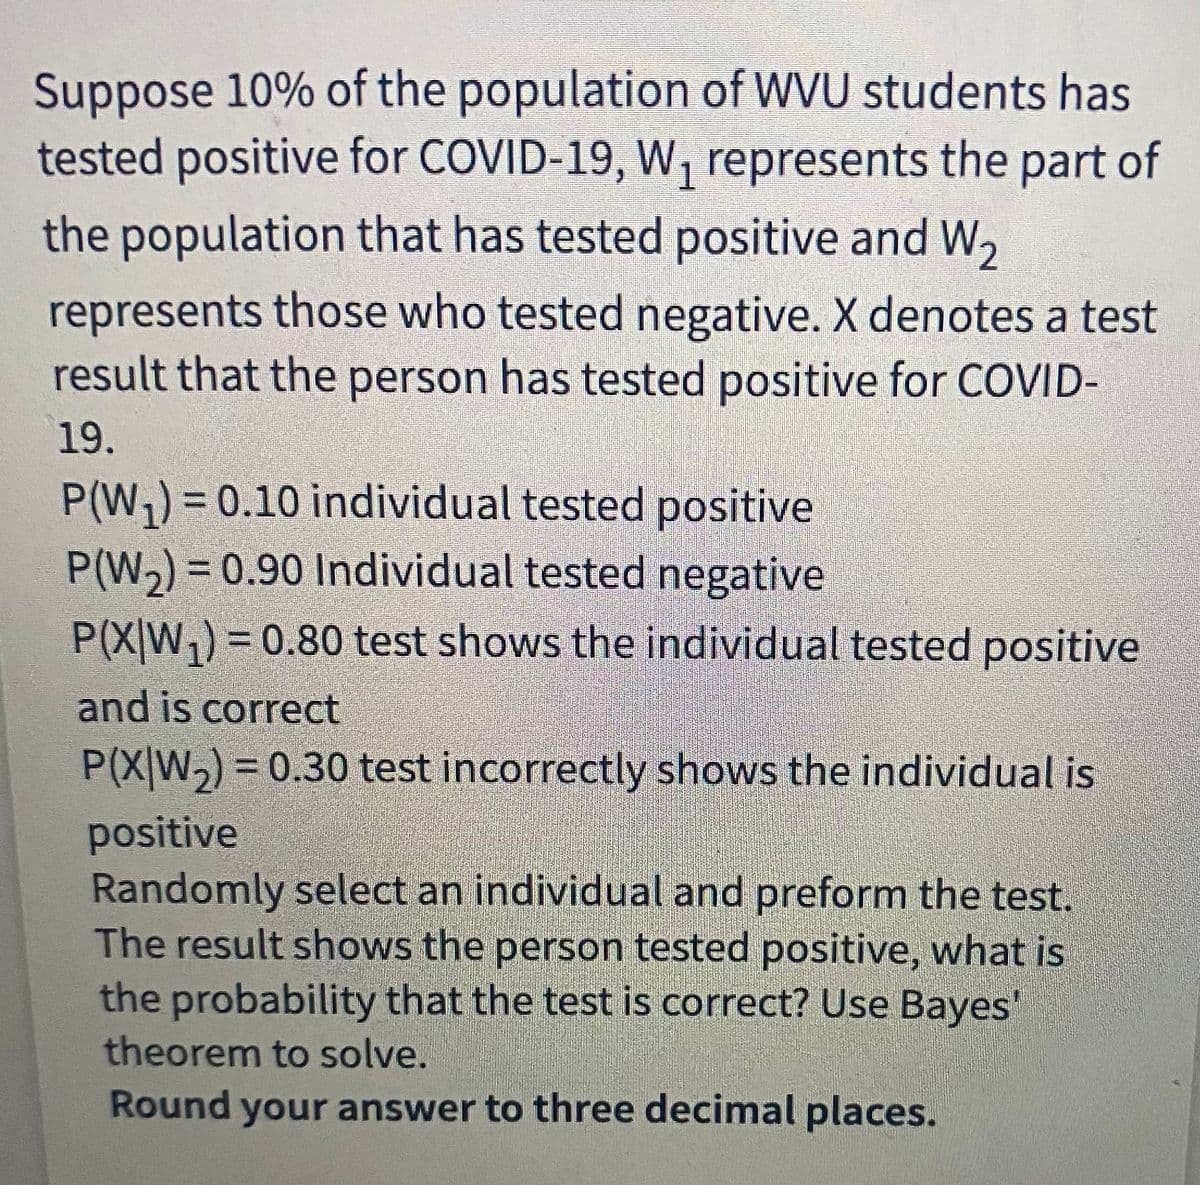 Suppose 10% of the population of WVU students has
tested positive for COVID-19, W, represents the part of
1.
the population that has tested positive and W,
represents those who tested negative. X denotes a test
result that the person has tested positive for COVID-
19.
P(W,)=D0.10 individual tested positive
%3D
P(W,) = 0.90 Individual tested negative
P(X|W,) = 0.80 test shows the individual tested positive
%3D
and is correct
P(X|W,) = 0.30 test incorrectly shows the individual is
positive
Randomly select an individual and preform the test.
The result shows the person tested positive, what is
the probability that the test is correct? Use Bayes'
theorem to solve.
Round your answer to three decimal places.
